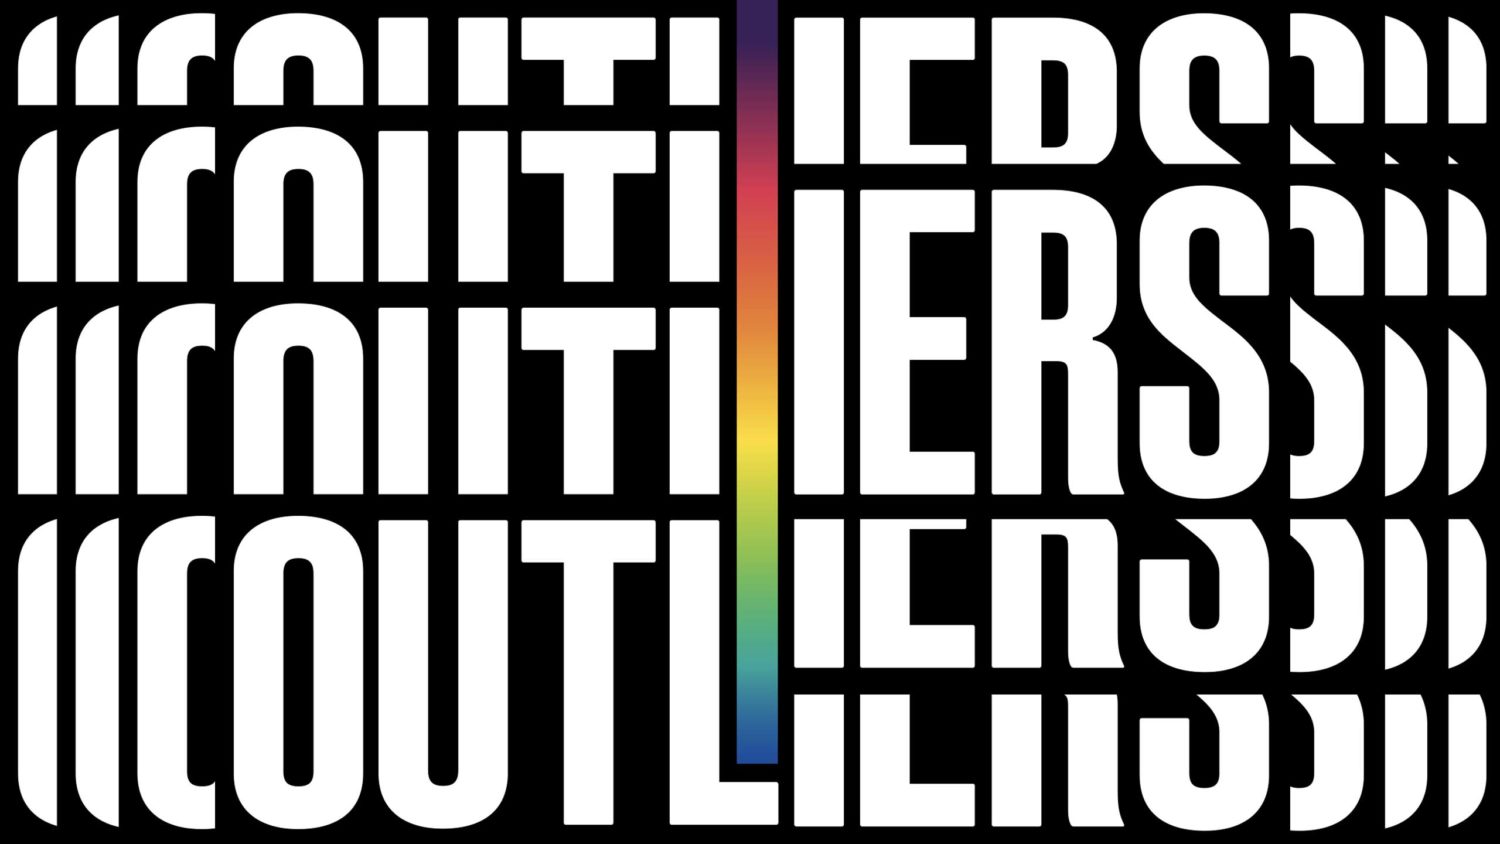 The design for the cover of Outliers, The Serious Review's first volume